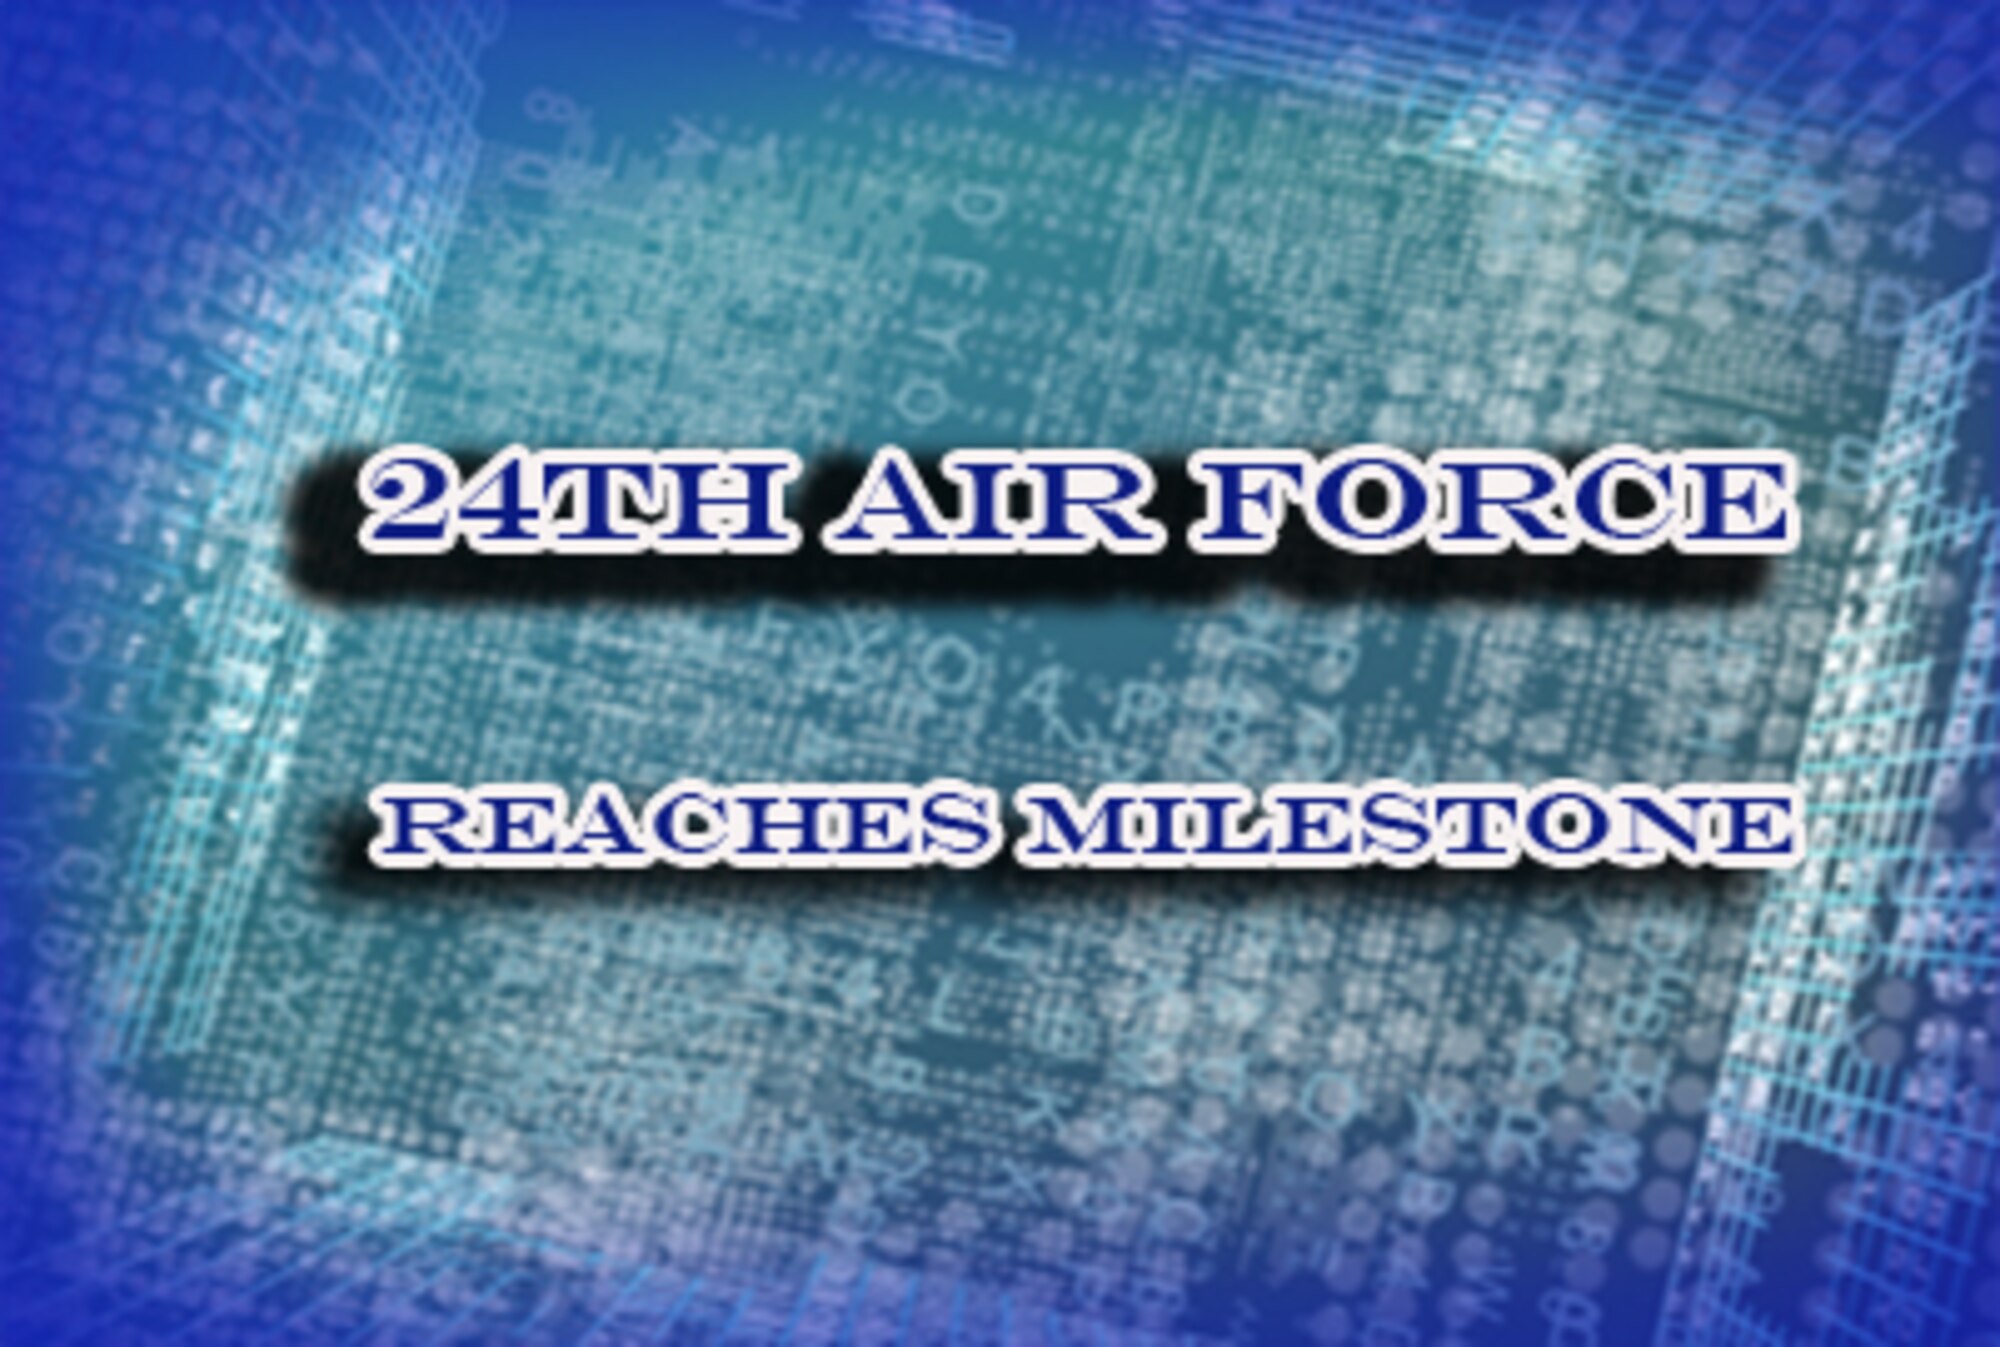 Twenty-fouth Air Force declared ready for full operations